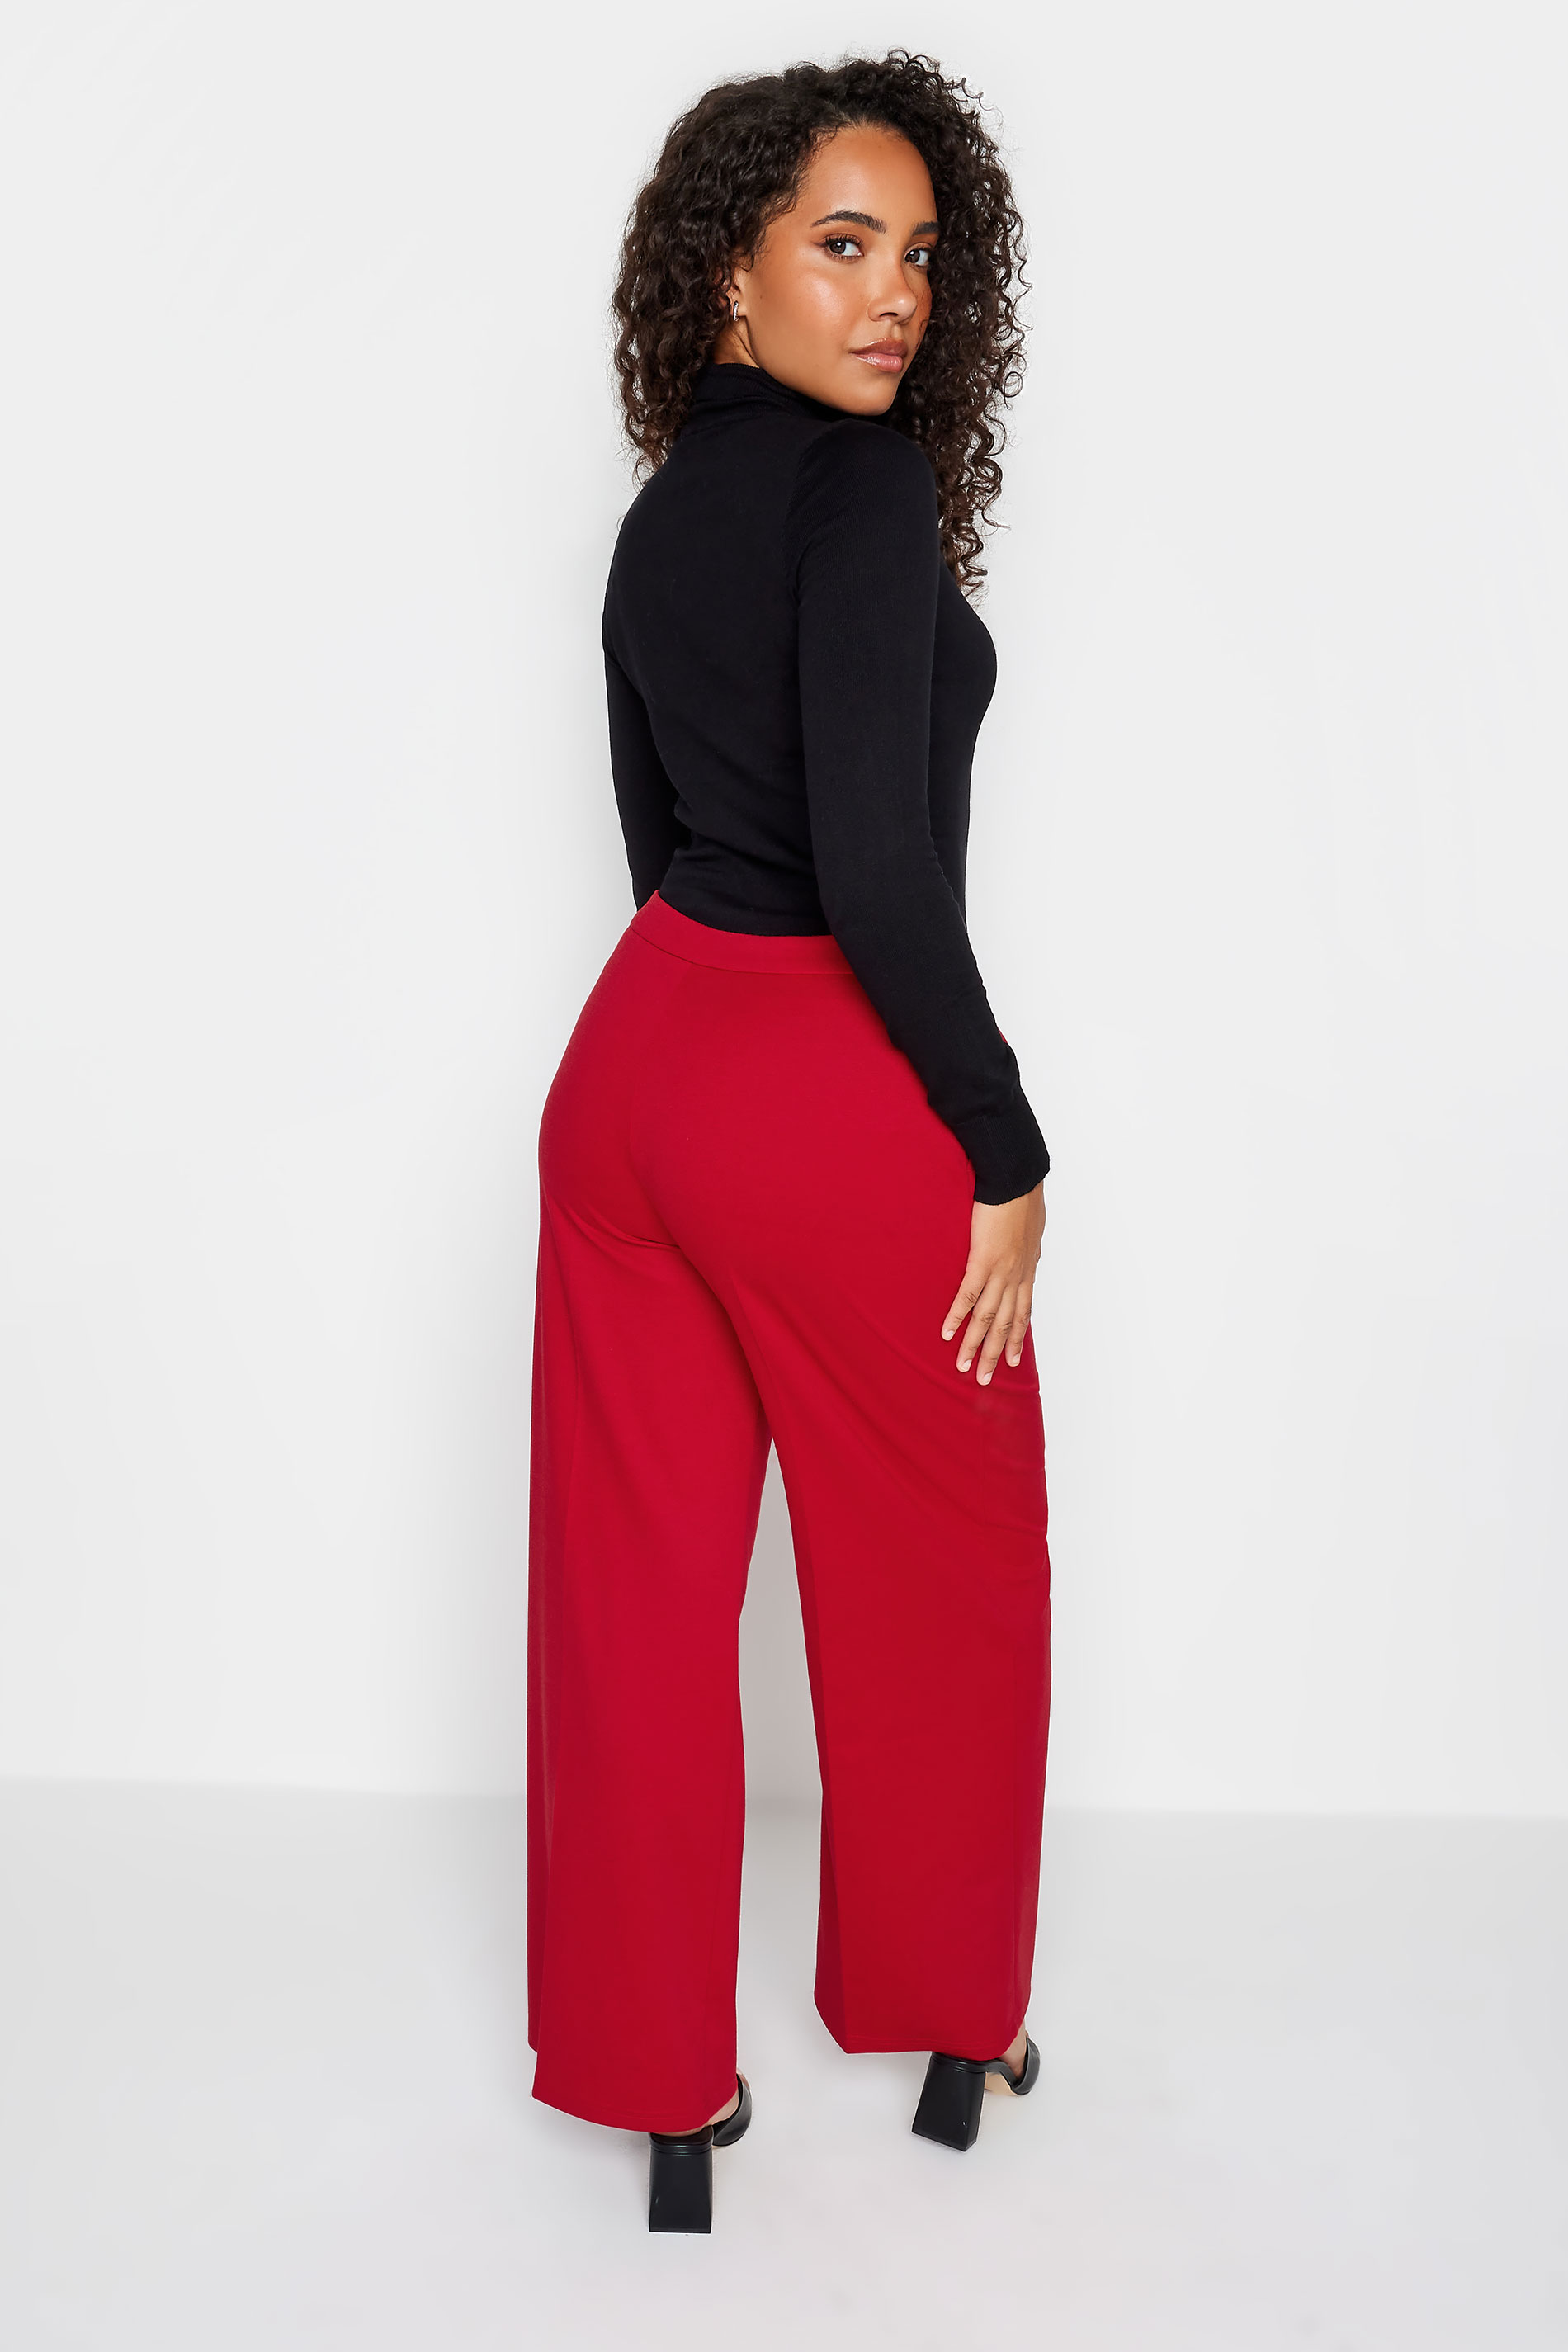 M&Co Red Ponte Wide Leg Trousers | M&Co